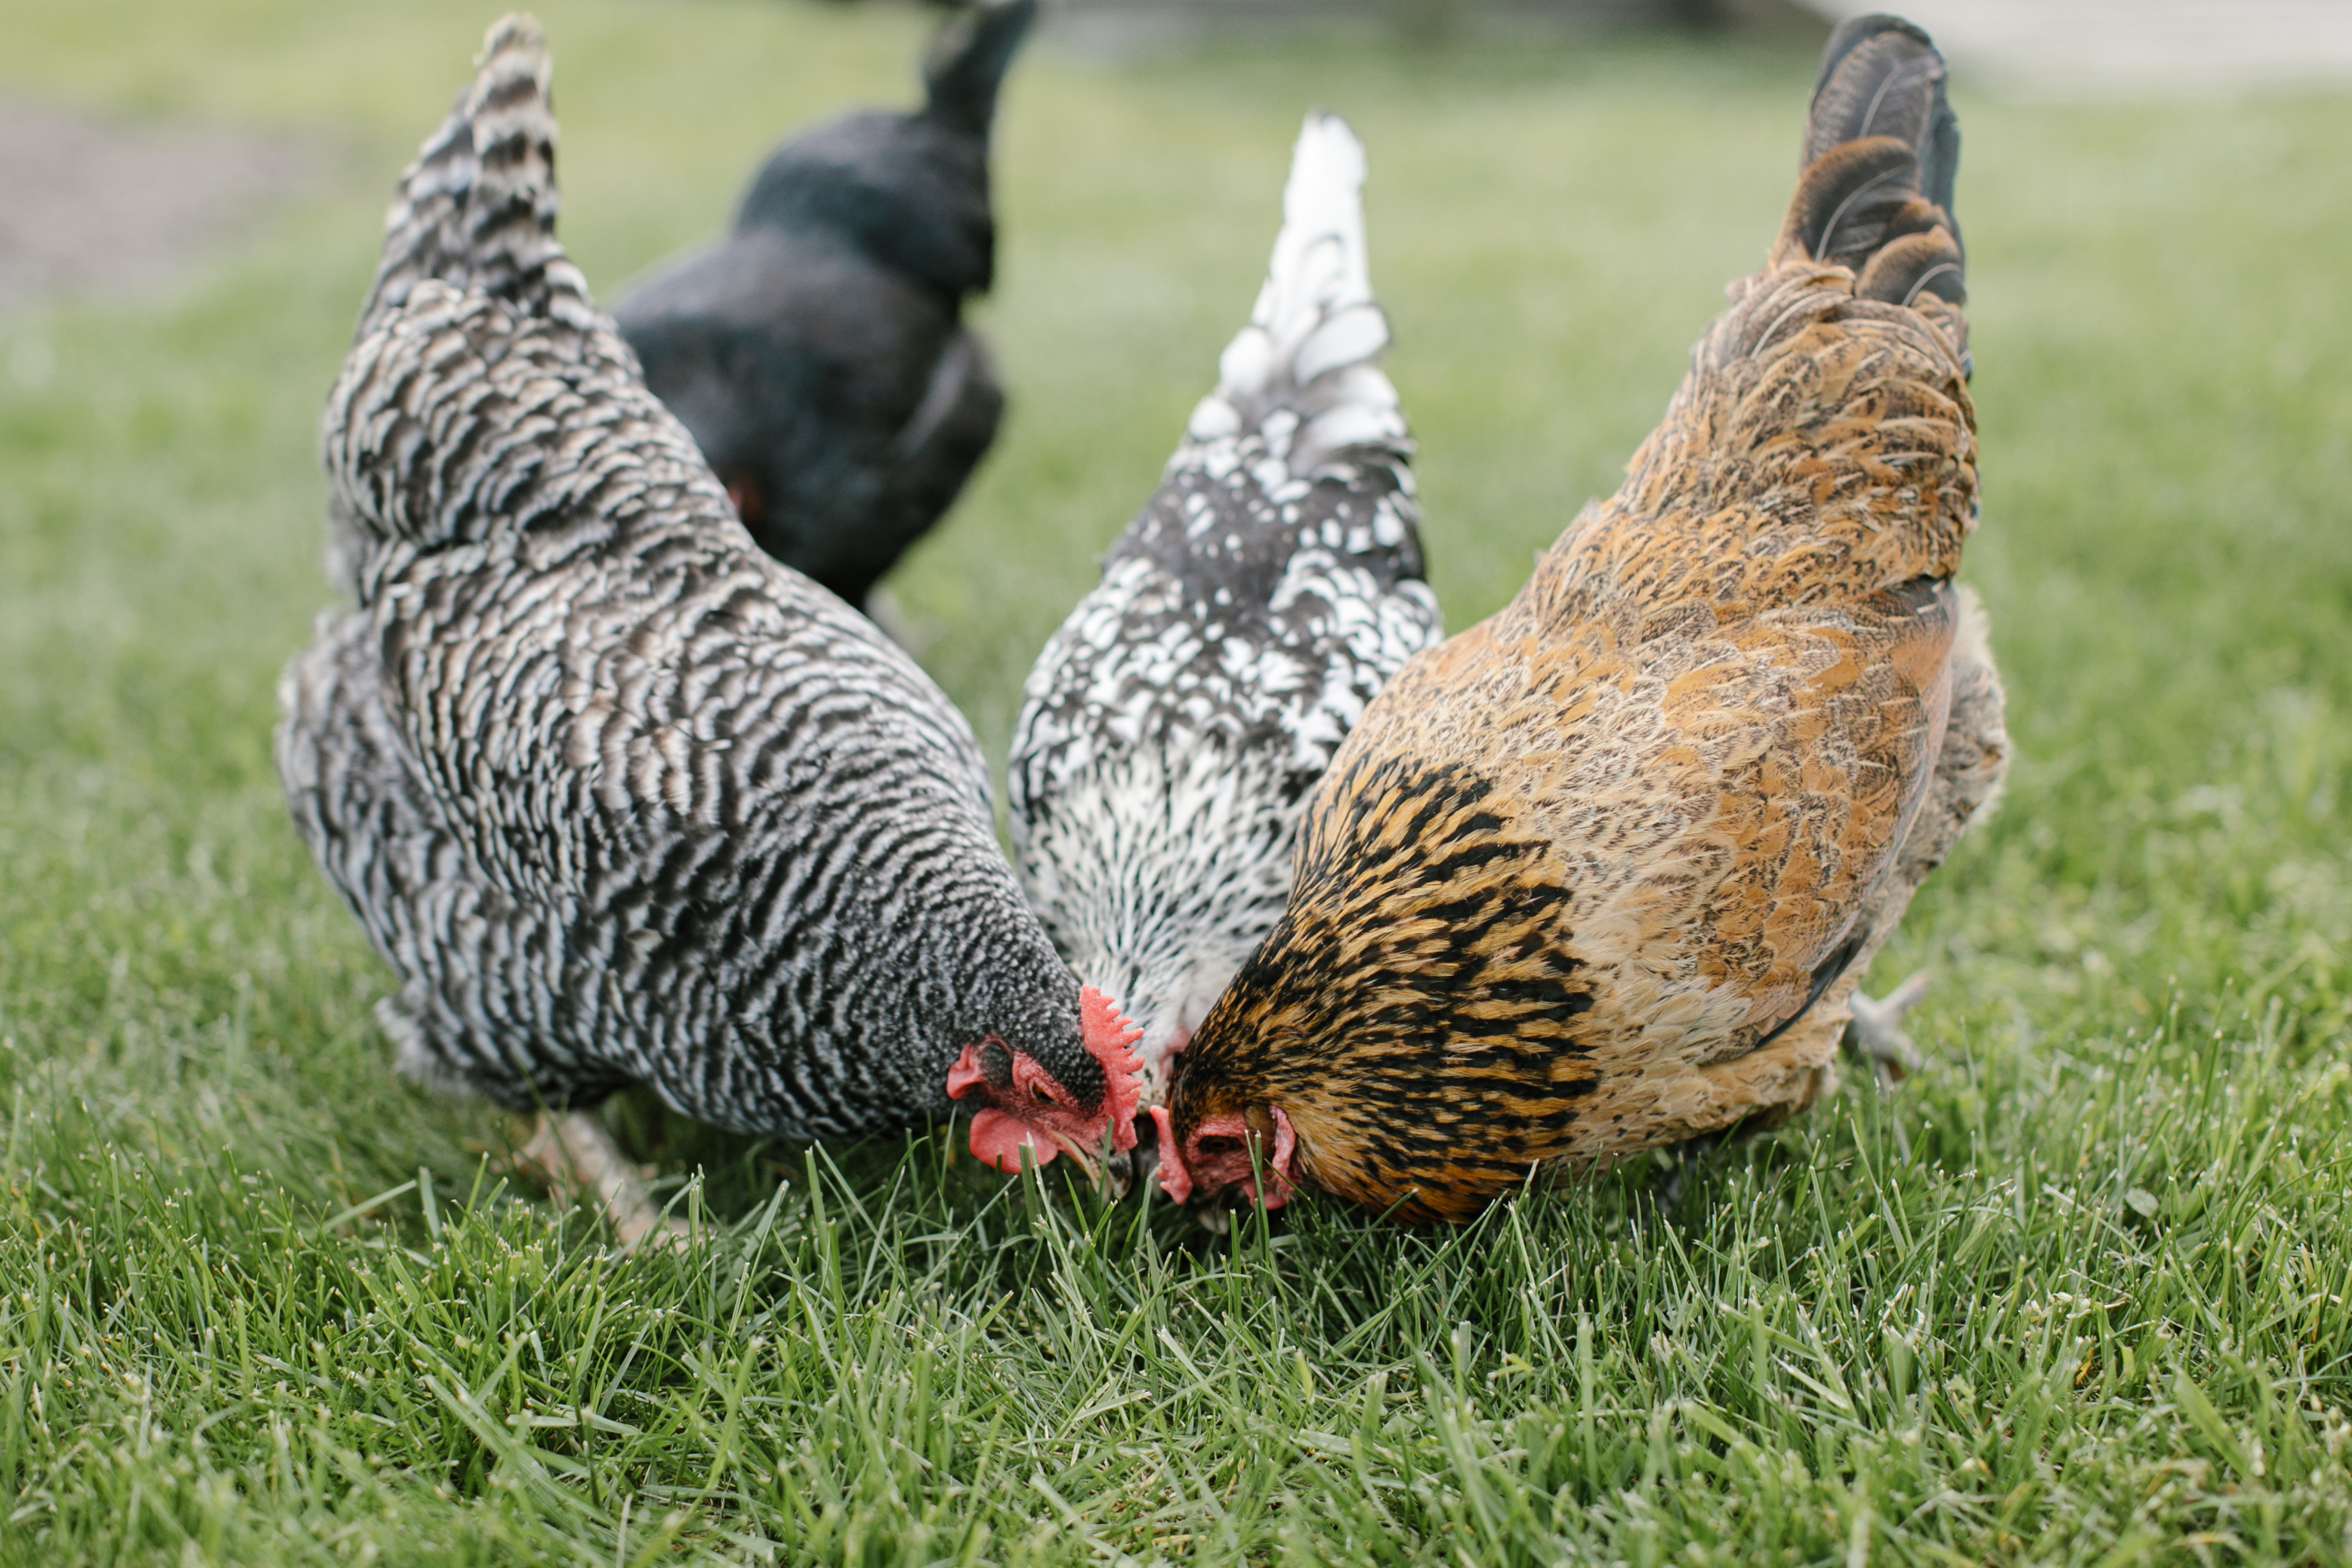 How To Raise Chickens - Everything You Need To Know To Start Your Own Sustainable Chicken Coop - Owning and Raising Chickens - Sustainable Living - Raising Backyard Chickens - DIY Chicken Coop - Chickens At Home - Chickens For Beginners - Communikait by Kait Hanson